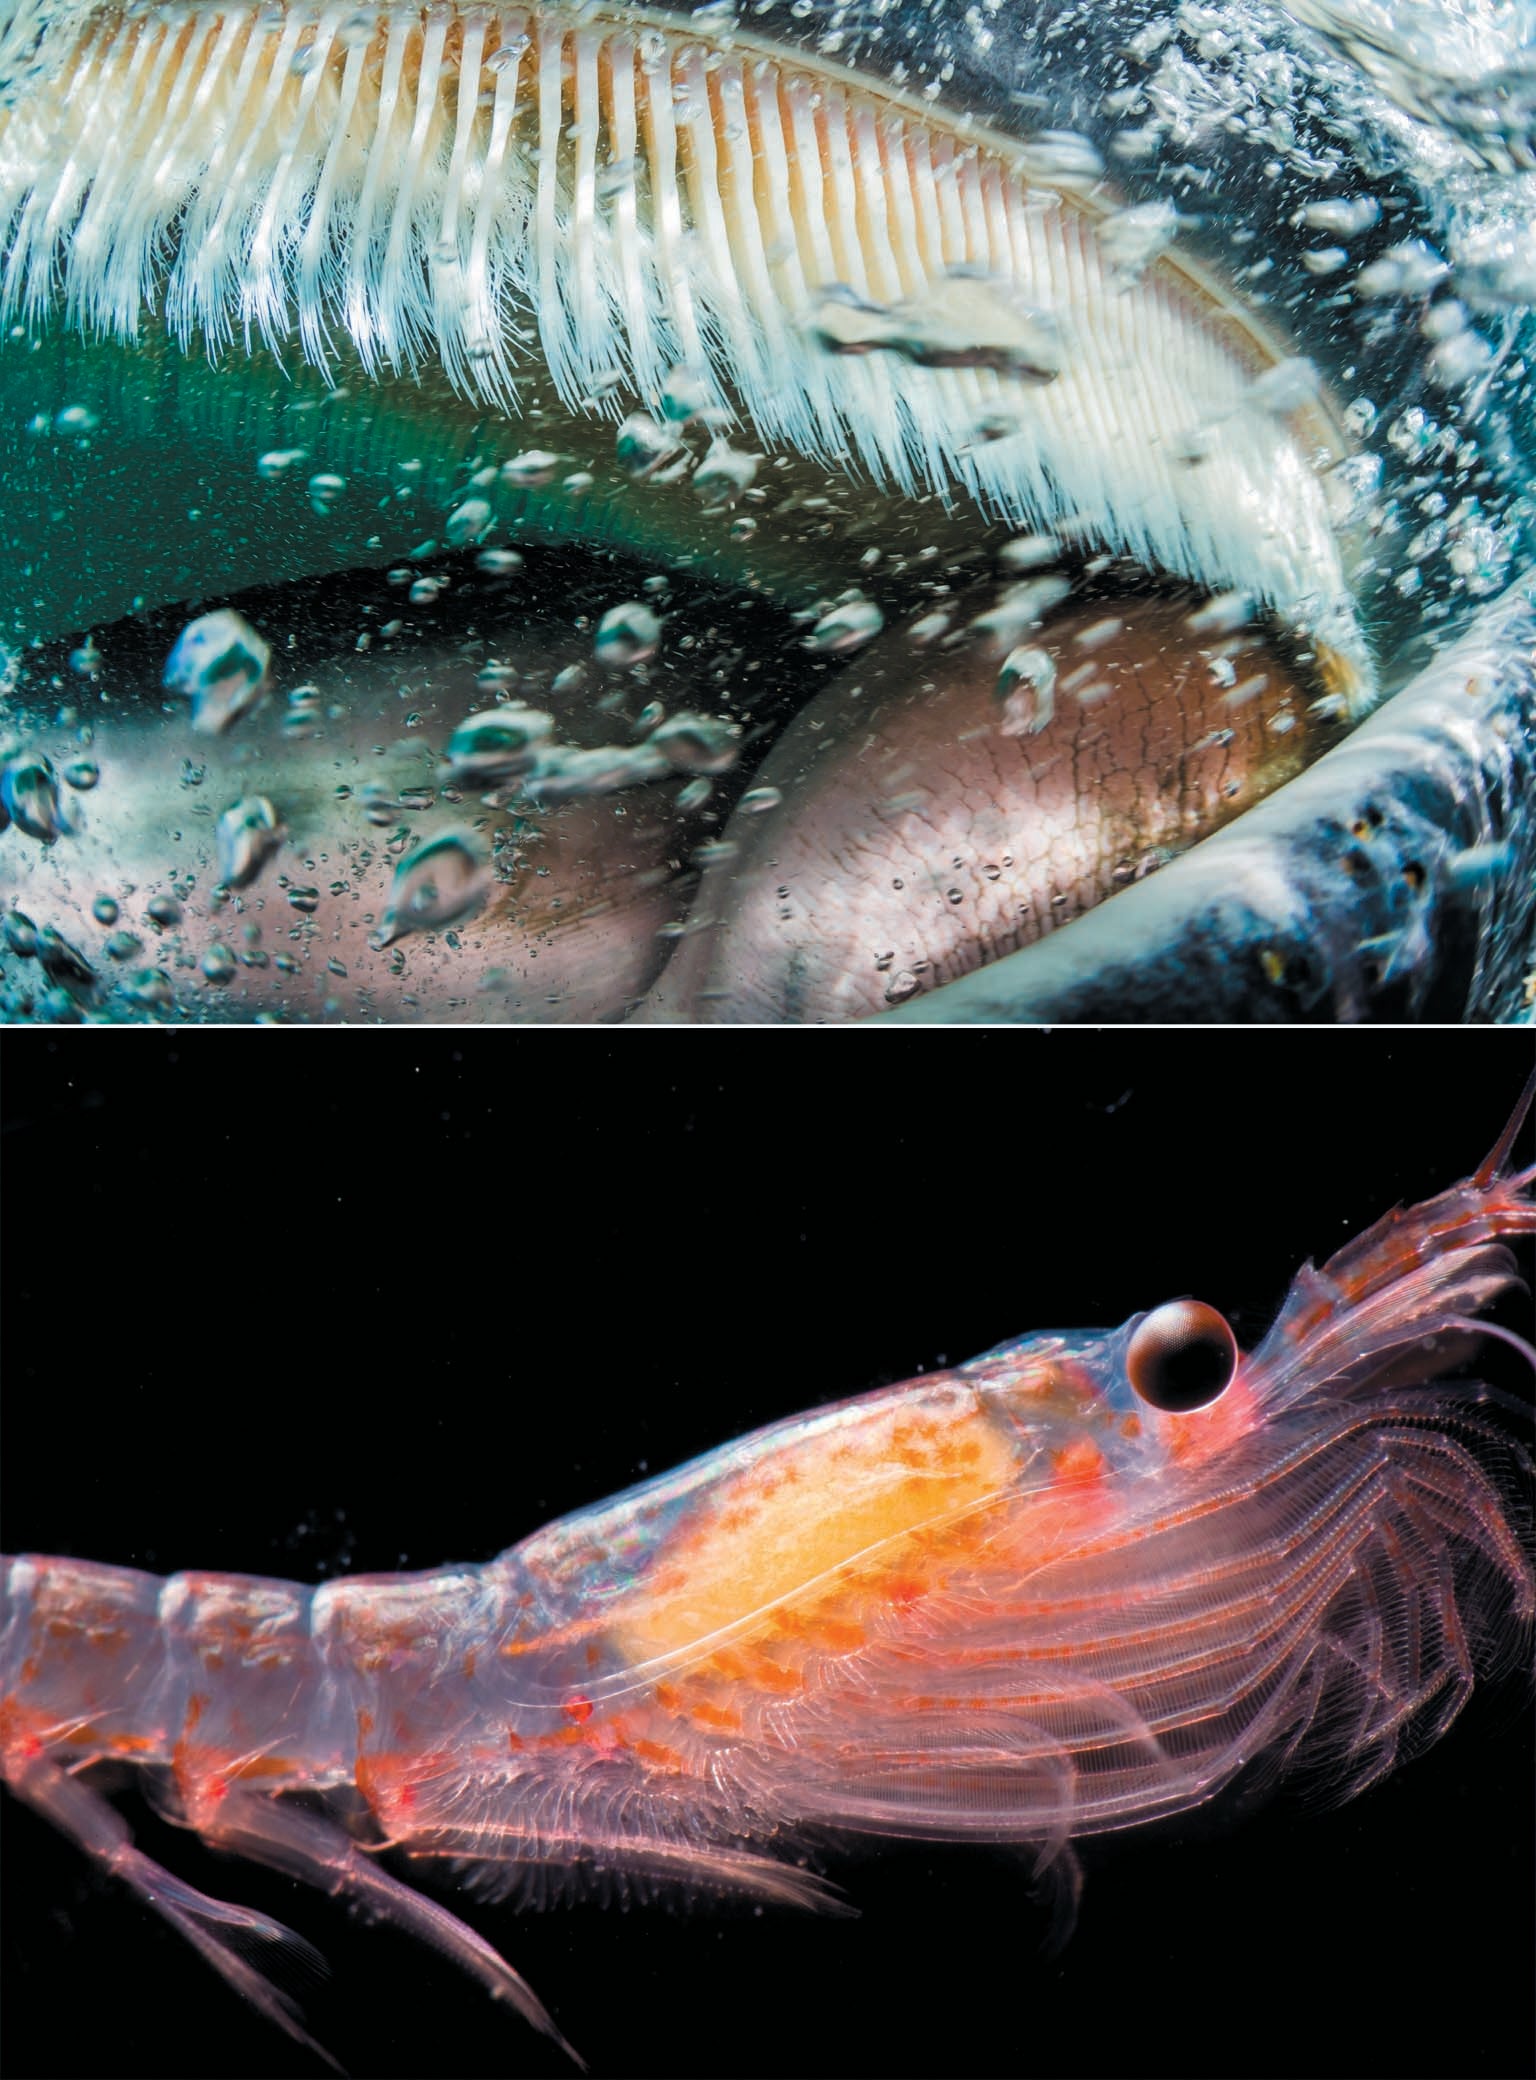 Underwater close-up showing whale’s mouth, baleen and tongue. Krill shown against a black backdrop.